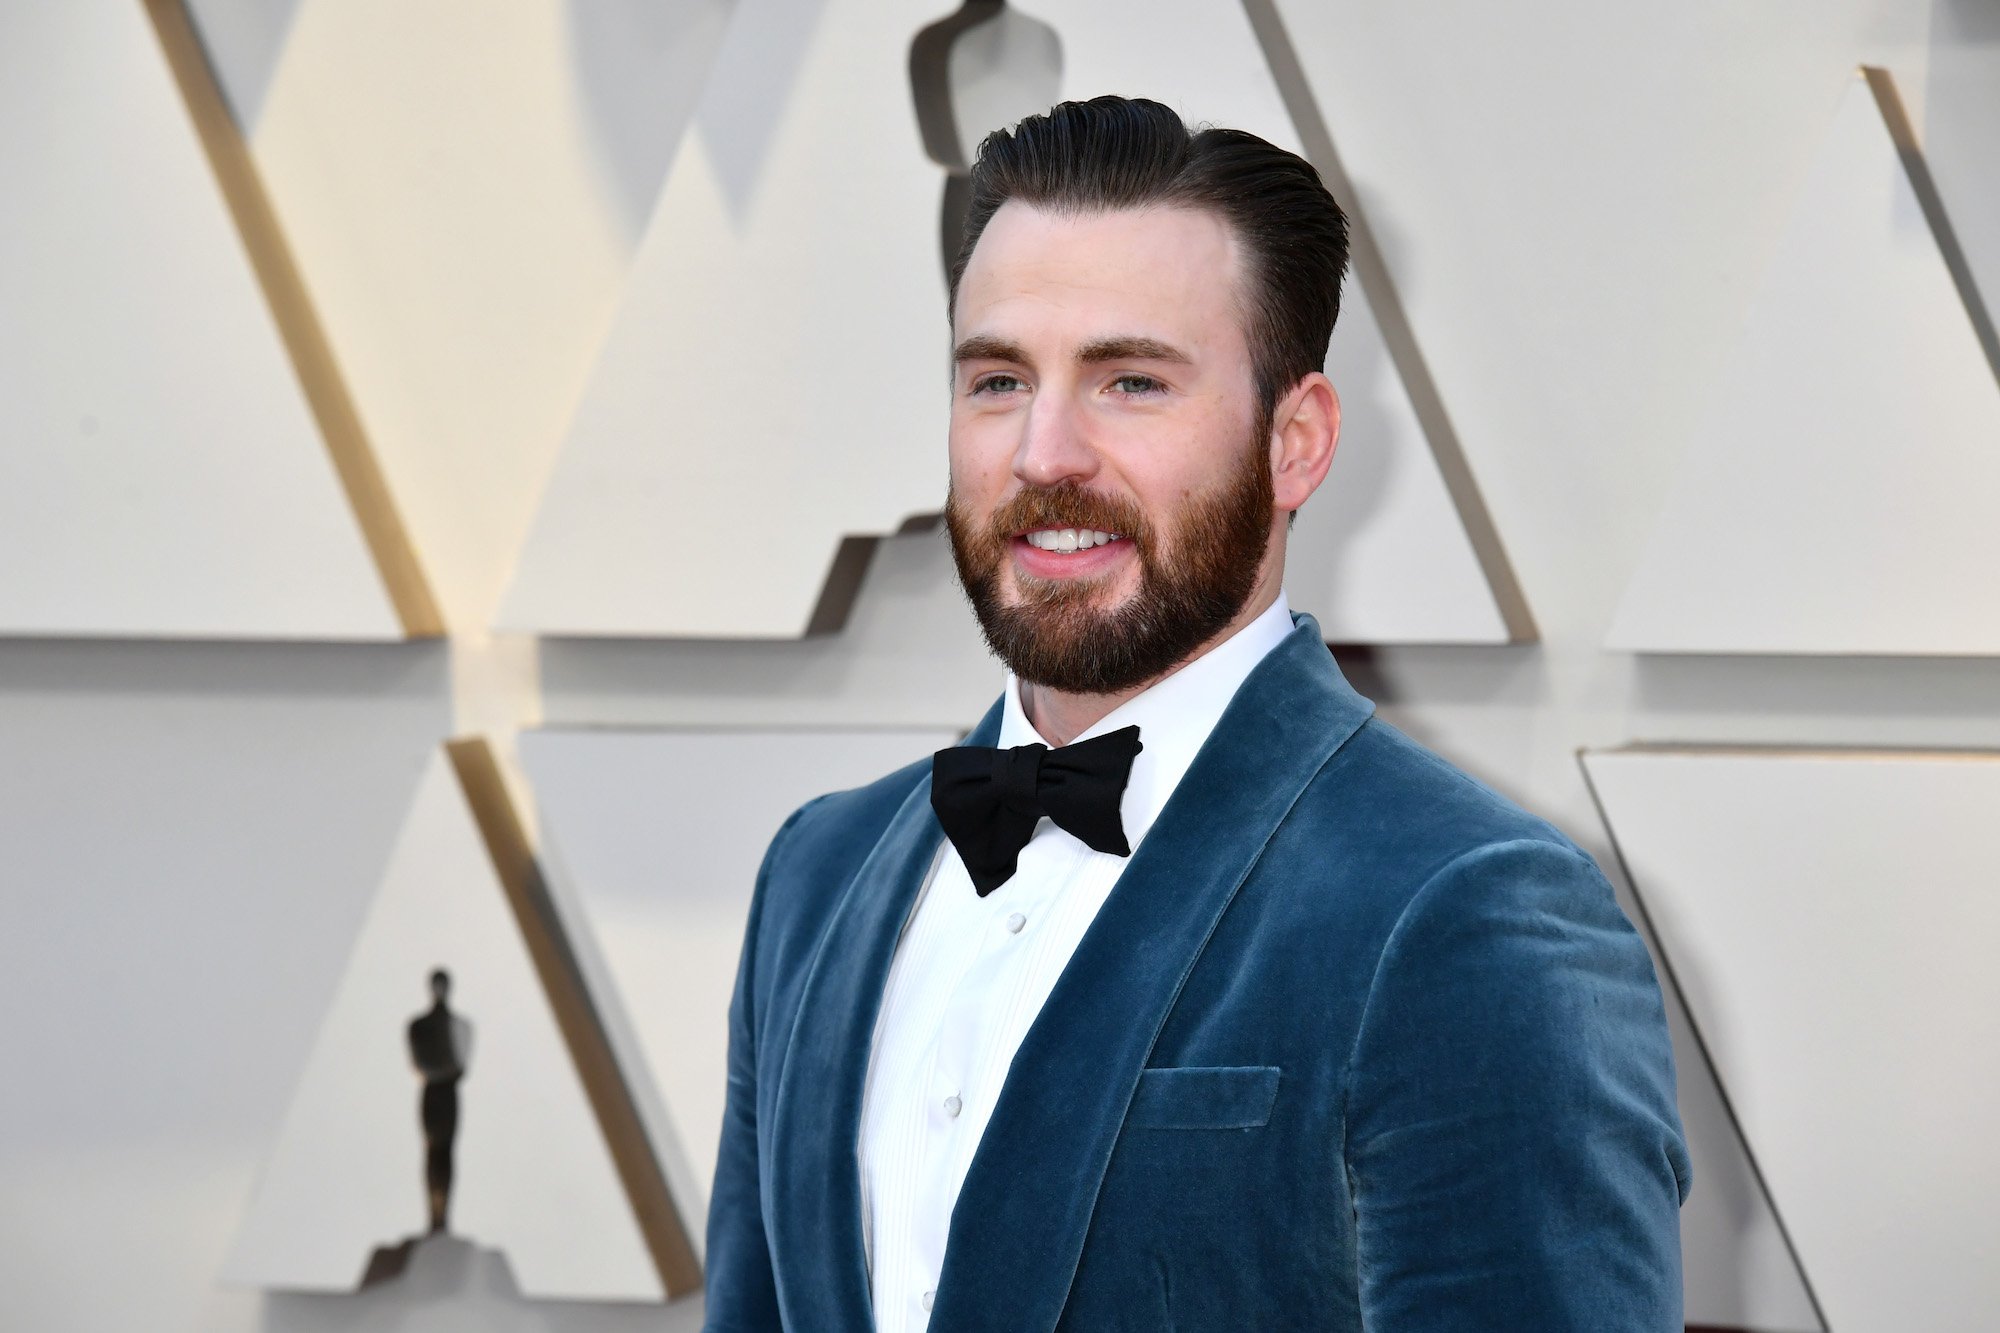 Chris Evans smiling in front of a textured background